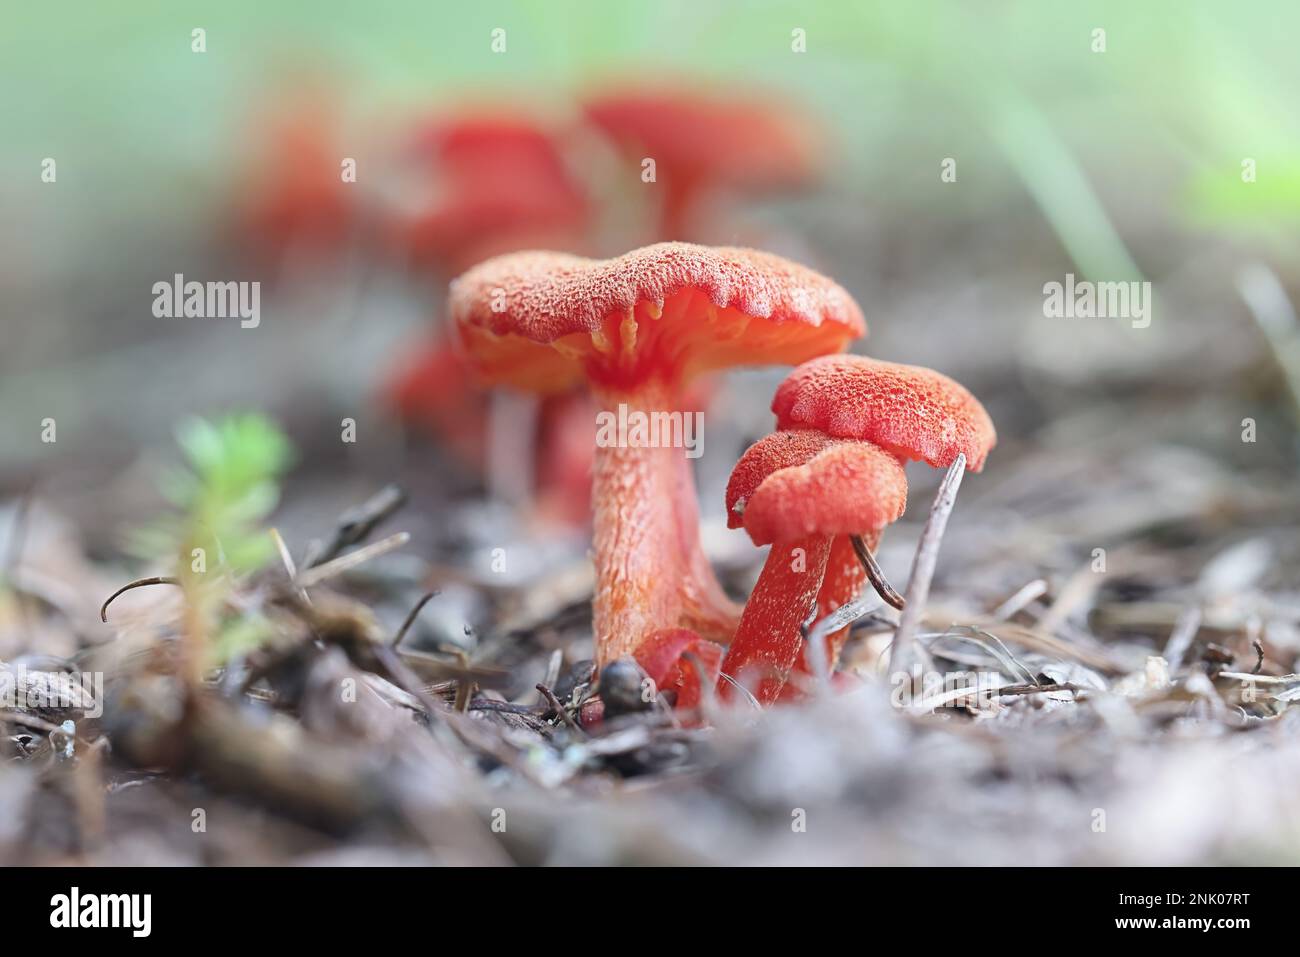 Hygrocybe miniata, also called Hygrophorus miniatus, commonly known as vermilion waxcap, wild mushroom from Finland Stock Photo